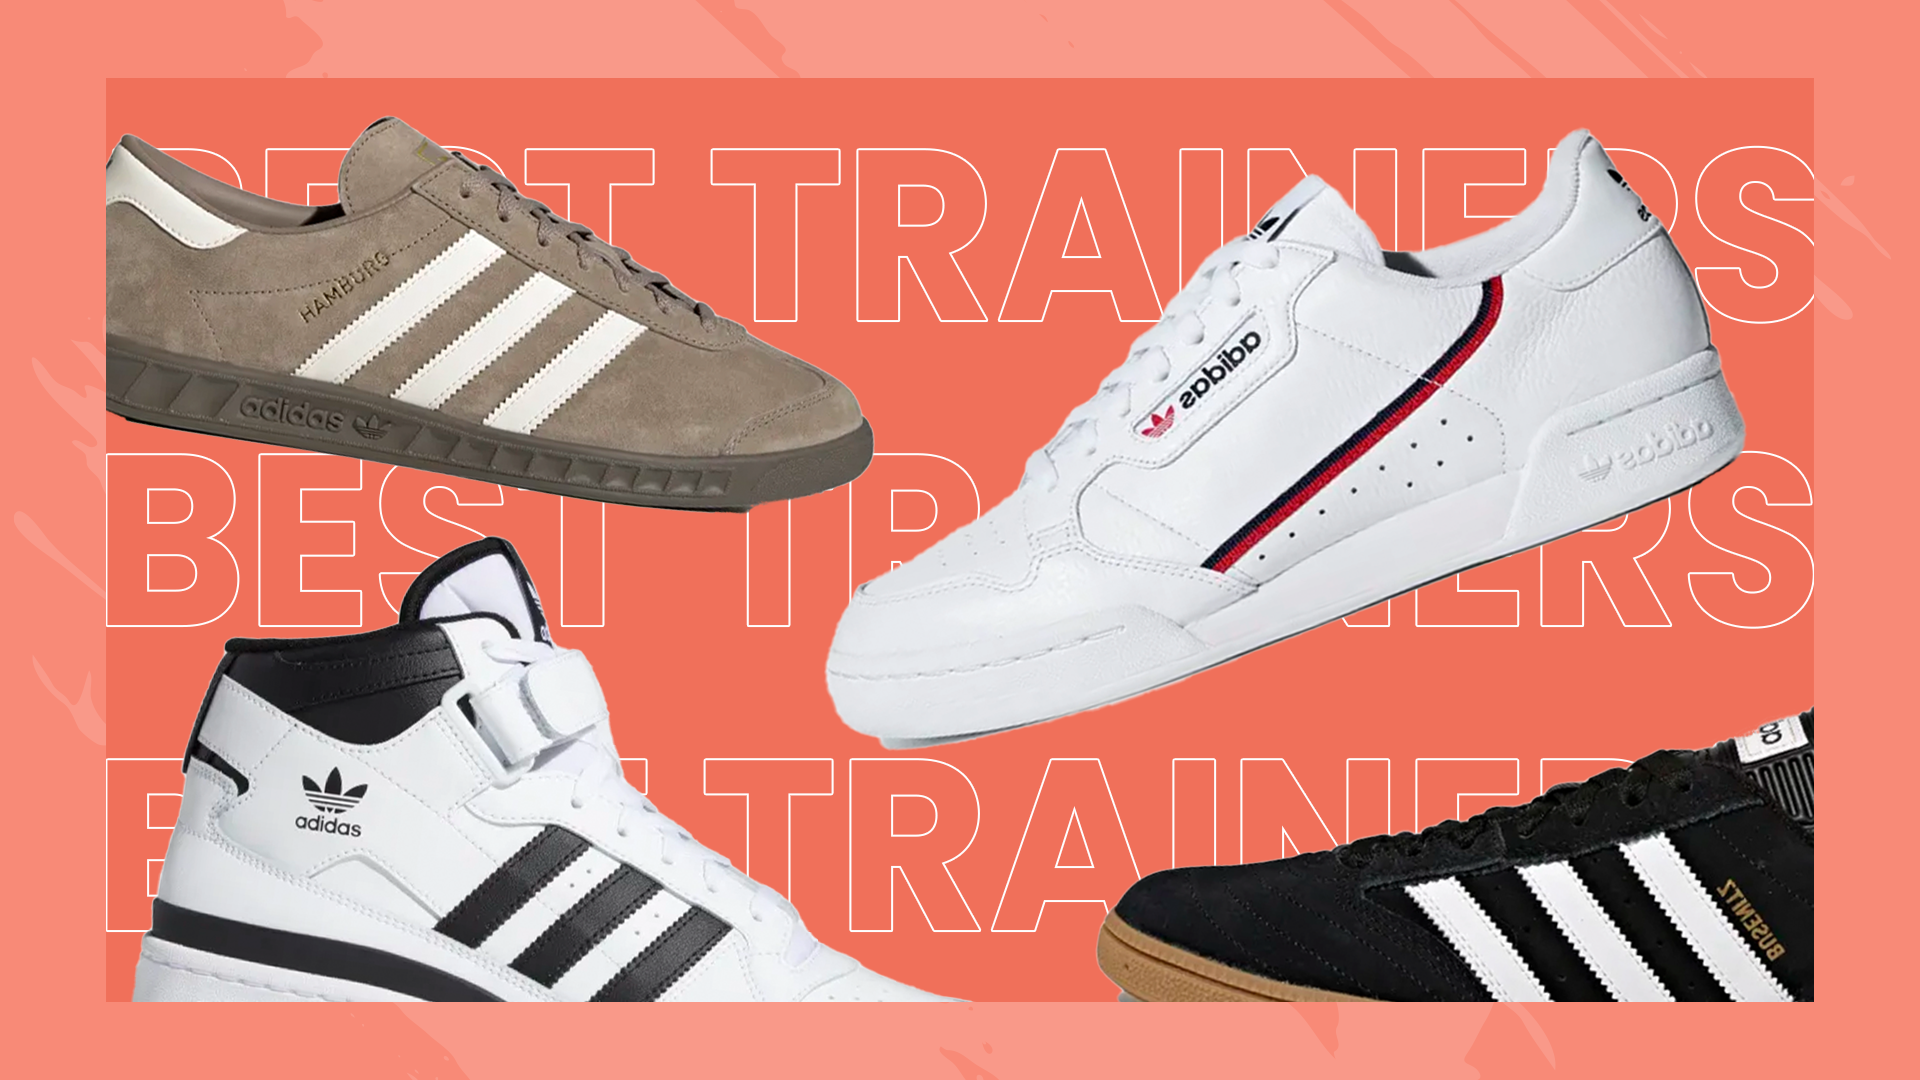 Adidas Samba fashion shoe for sale in South Africa🇿🇦 | Adidas shoes mens  sneakers, Adidas outfit shoes, Adidas shoes mens